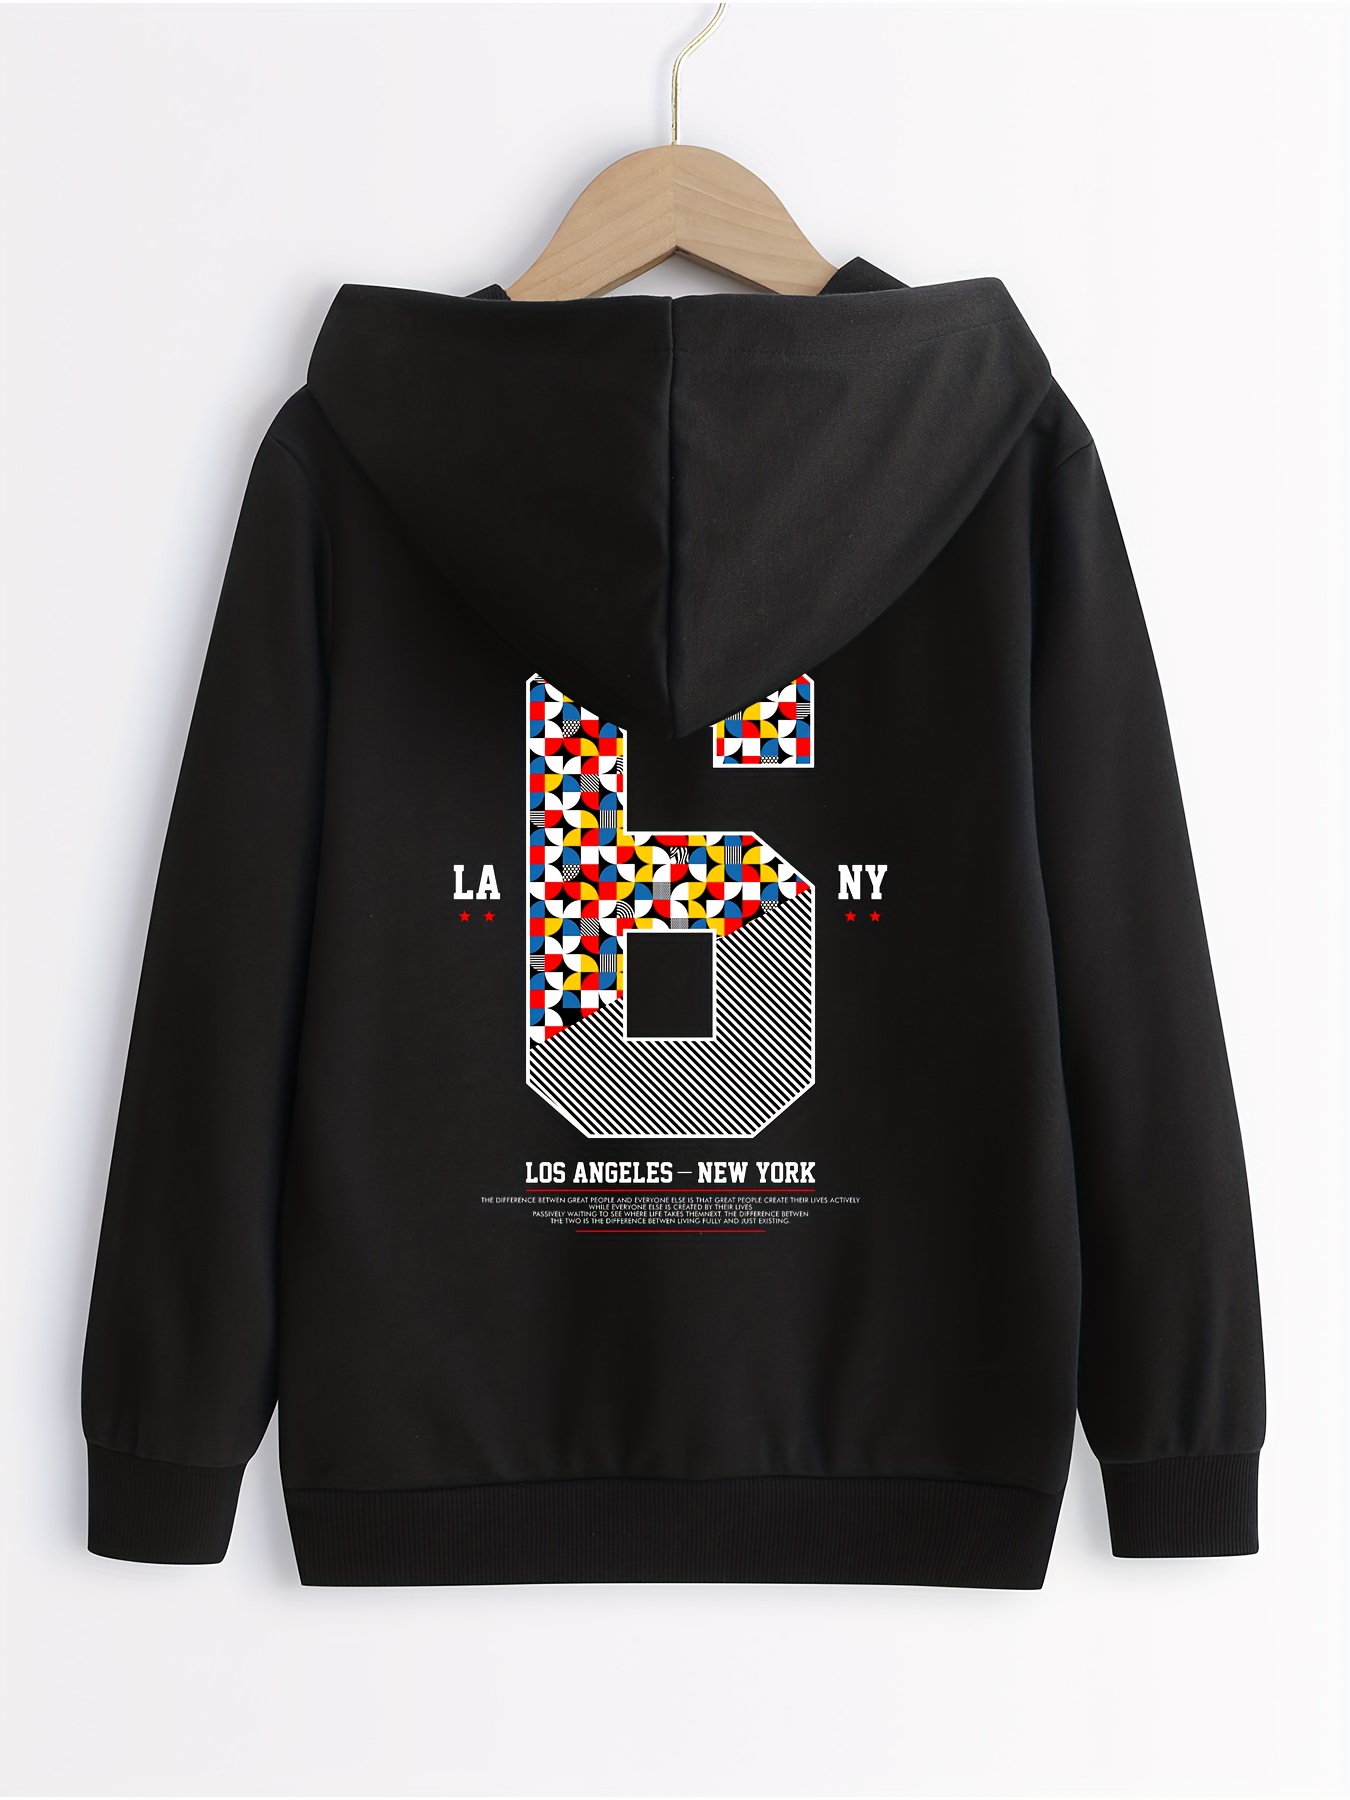 6 Kids Pullover Hoodies for Sale